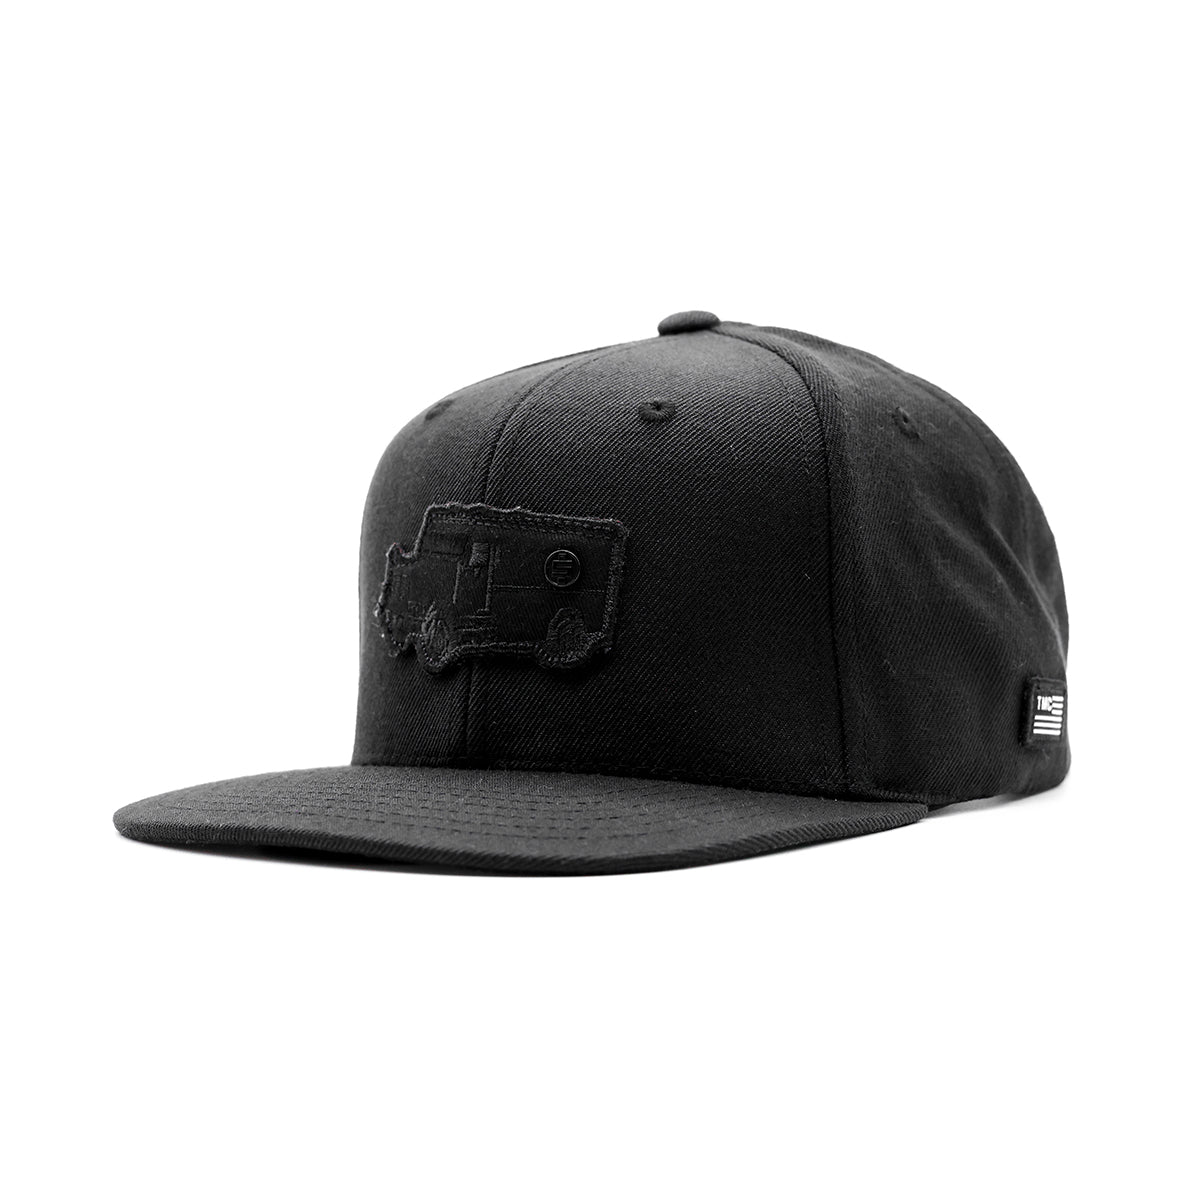 All Money In Armored Truck Limited Edition Snapback - Black/Black - Angle